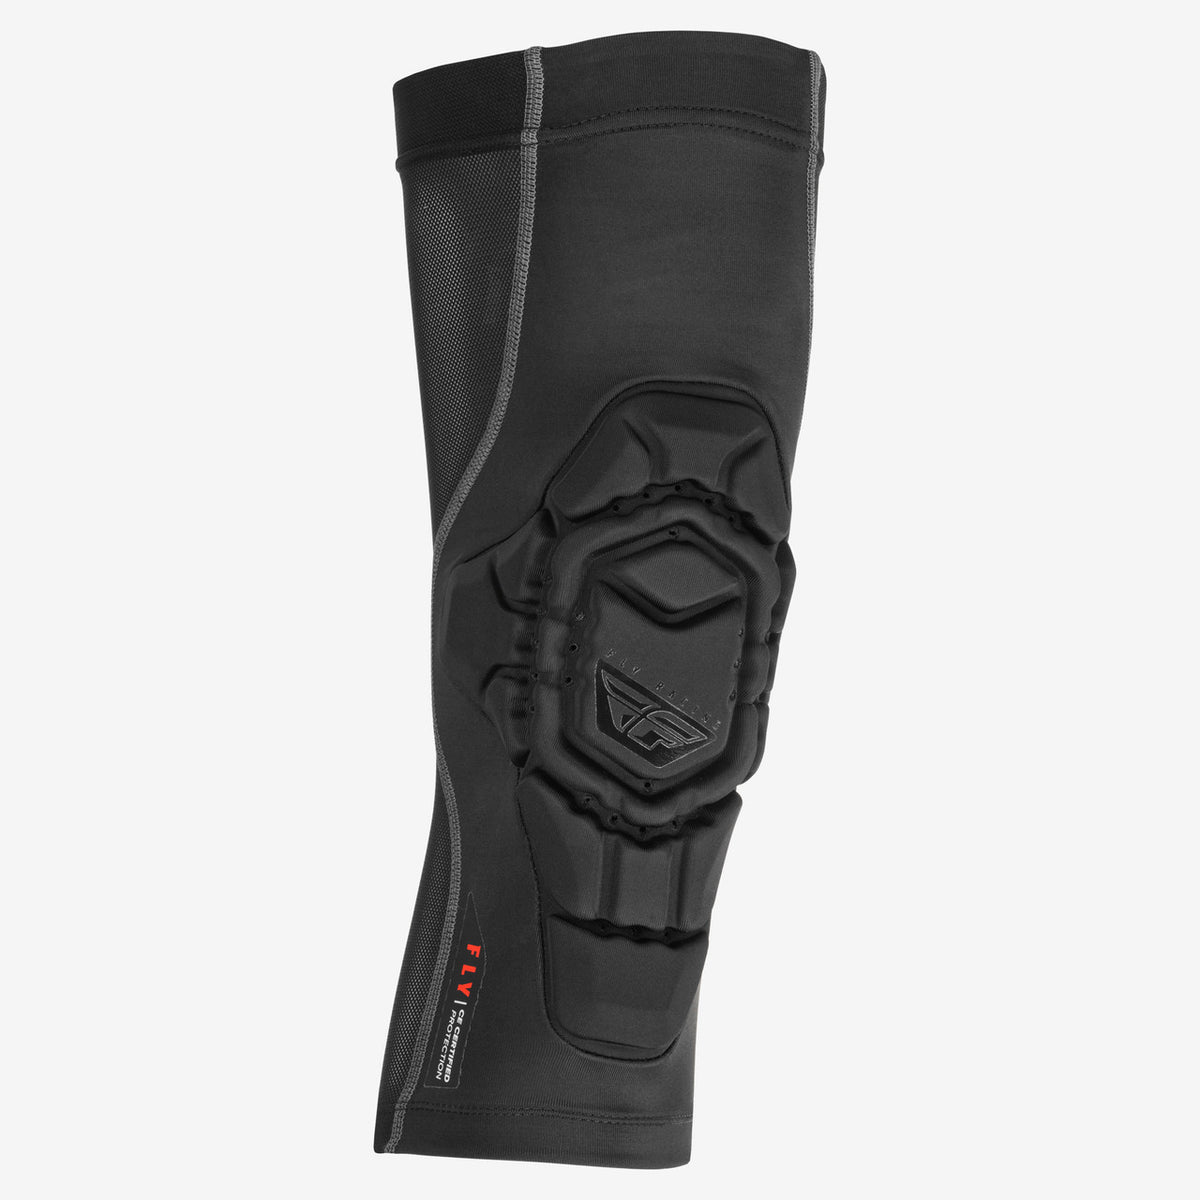 FLY-RACING-LITE-CE-KNEE-GUARD - Riding Gear - Synik Clothing - synikclothing.com